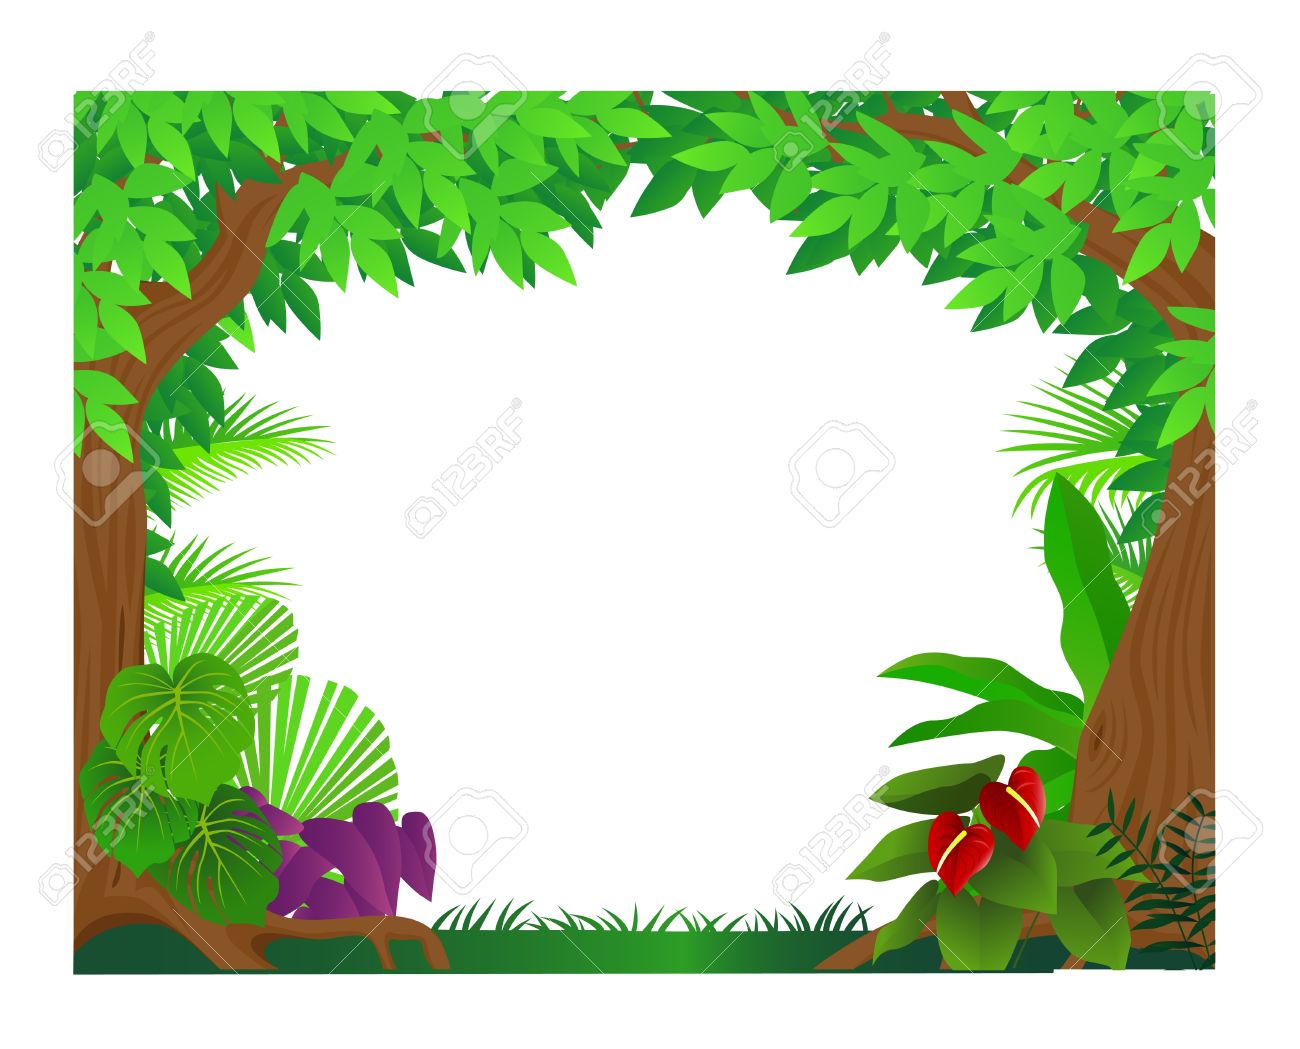 Jungle background clipart 2 » Clipart Station.